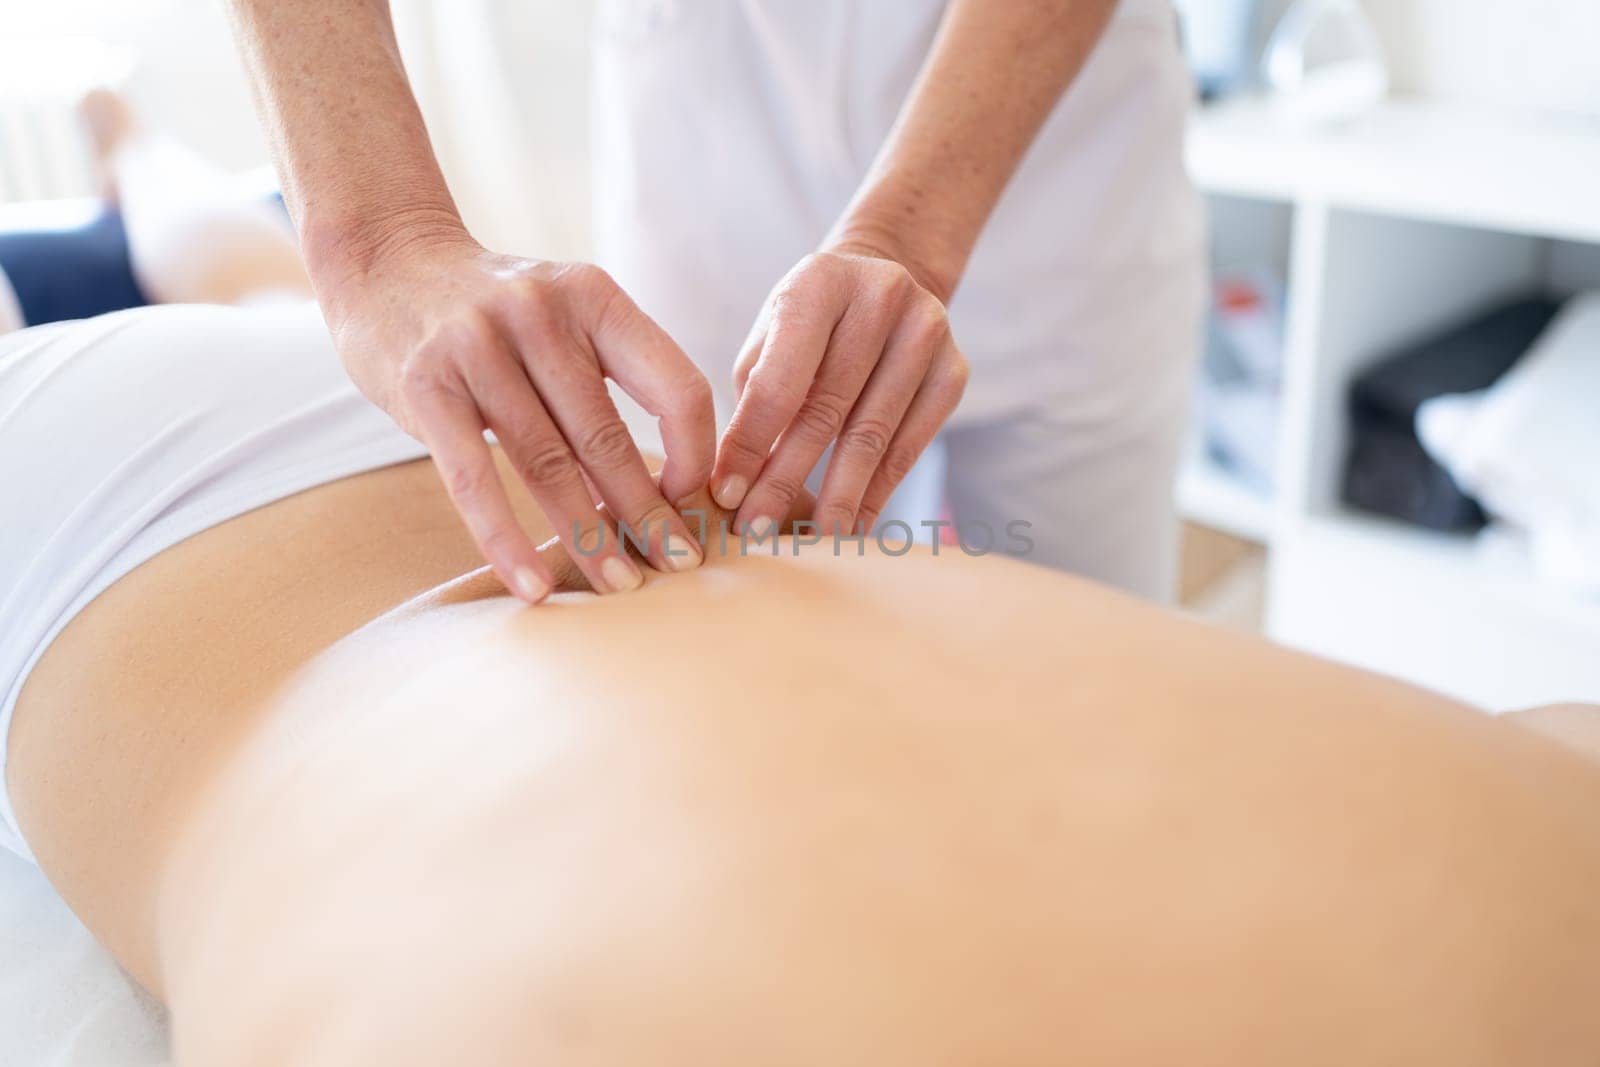 Crop anonymous female massage therapist rubbing back of patient with hands during rehabilitation session in manual therapy clinic